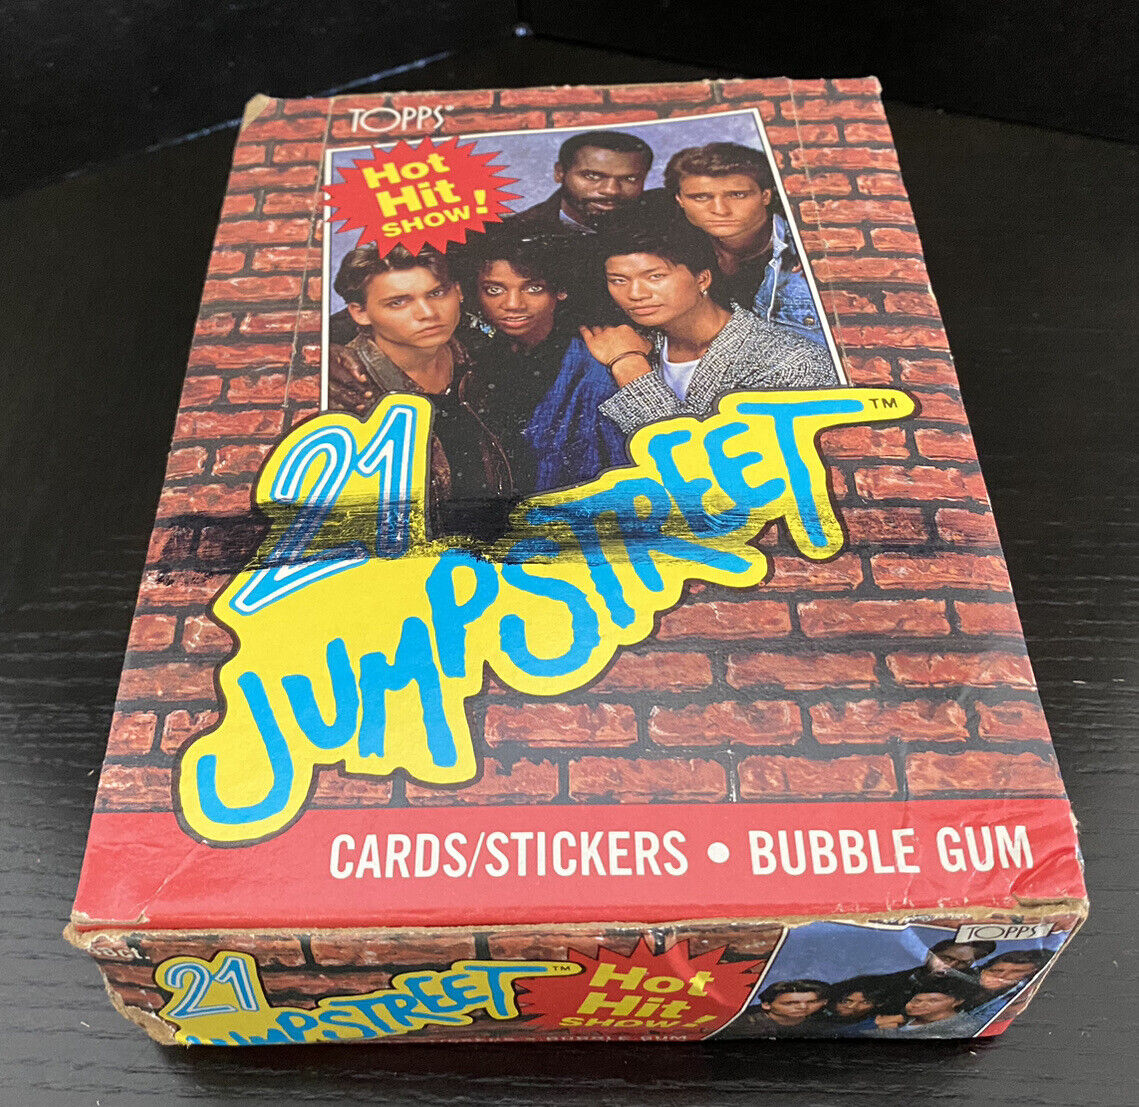 1987 Topps 21 Jumpstreet Johnny Depp Cards 48 Sealed Wax Packs Complete Box 1988